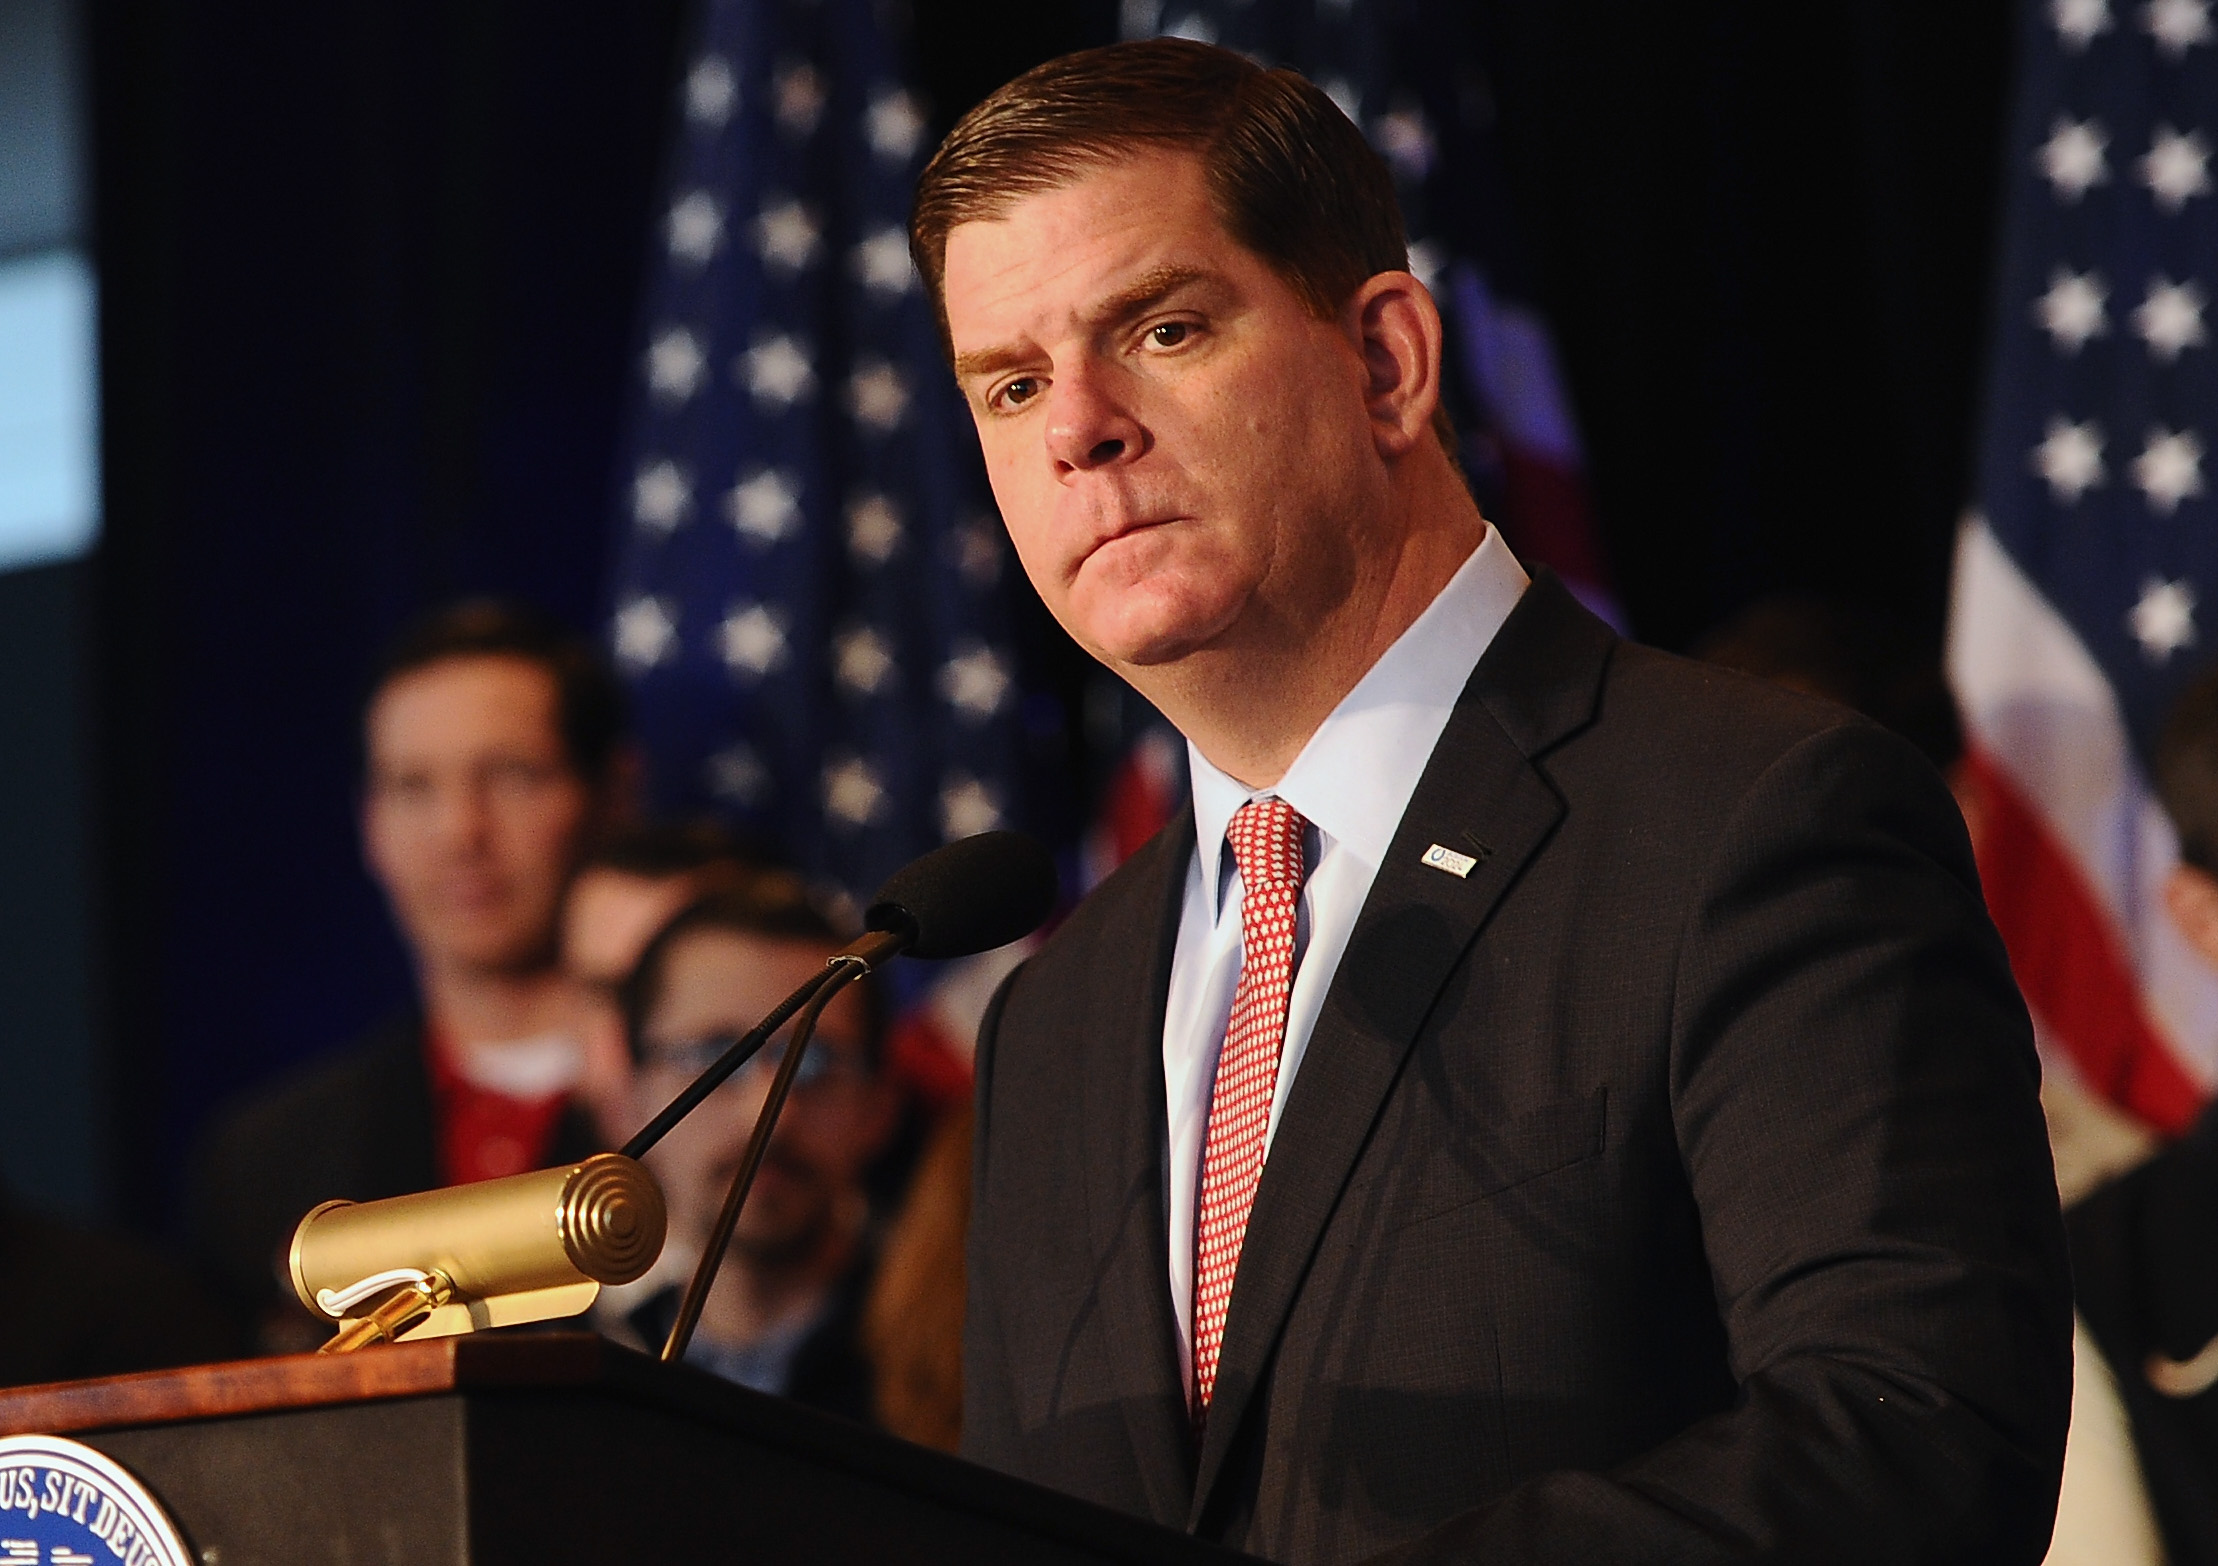 Boston Mayor Martin J. Walsh addresses the media during a press conference to announce Boston as the U.S. applicant city to host the 2024 Olympic and Paralympic Games at the Boston Convention and Exhibition Center on Jan. 9, 2015 in Boston (Maddie Meyer—Getty Images)